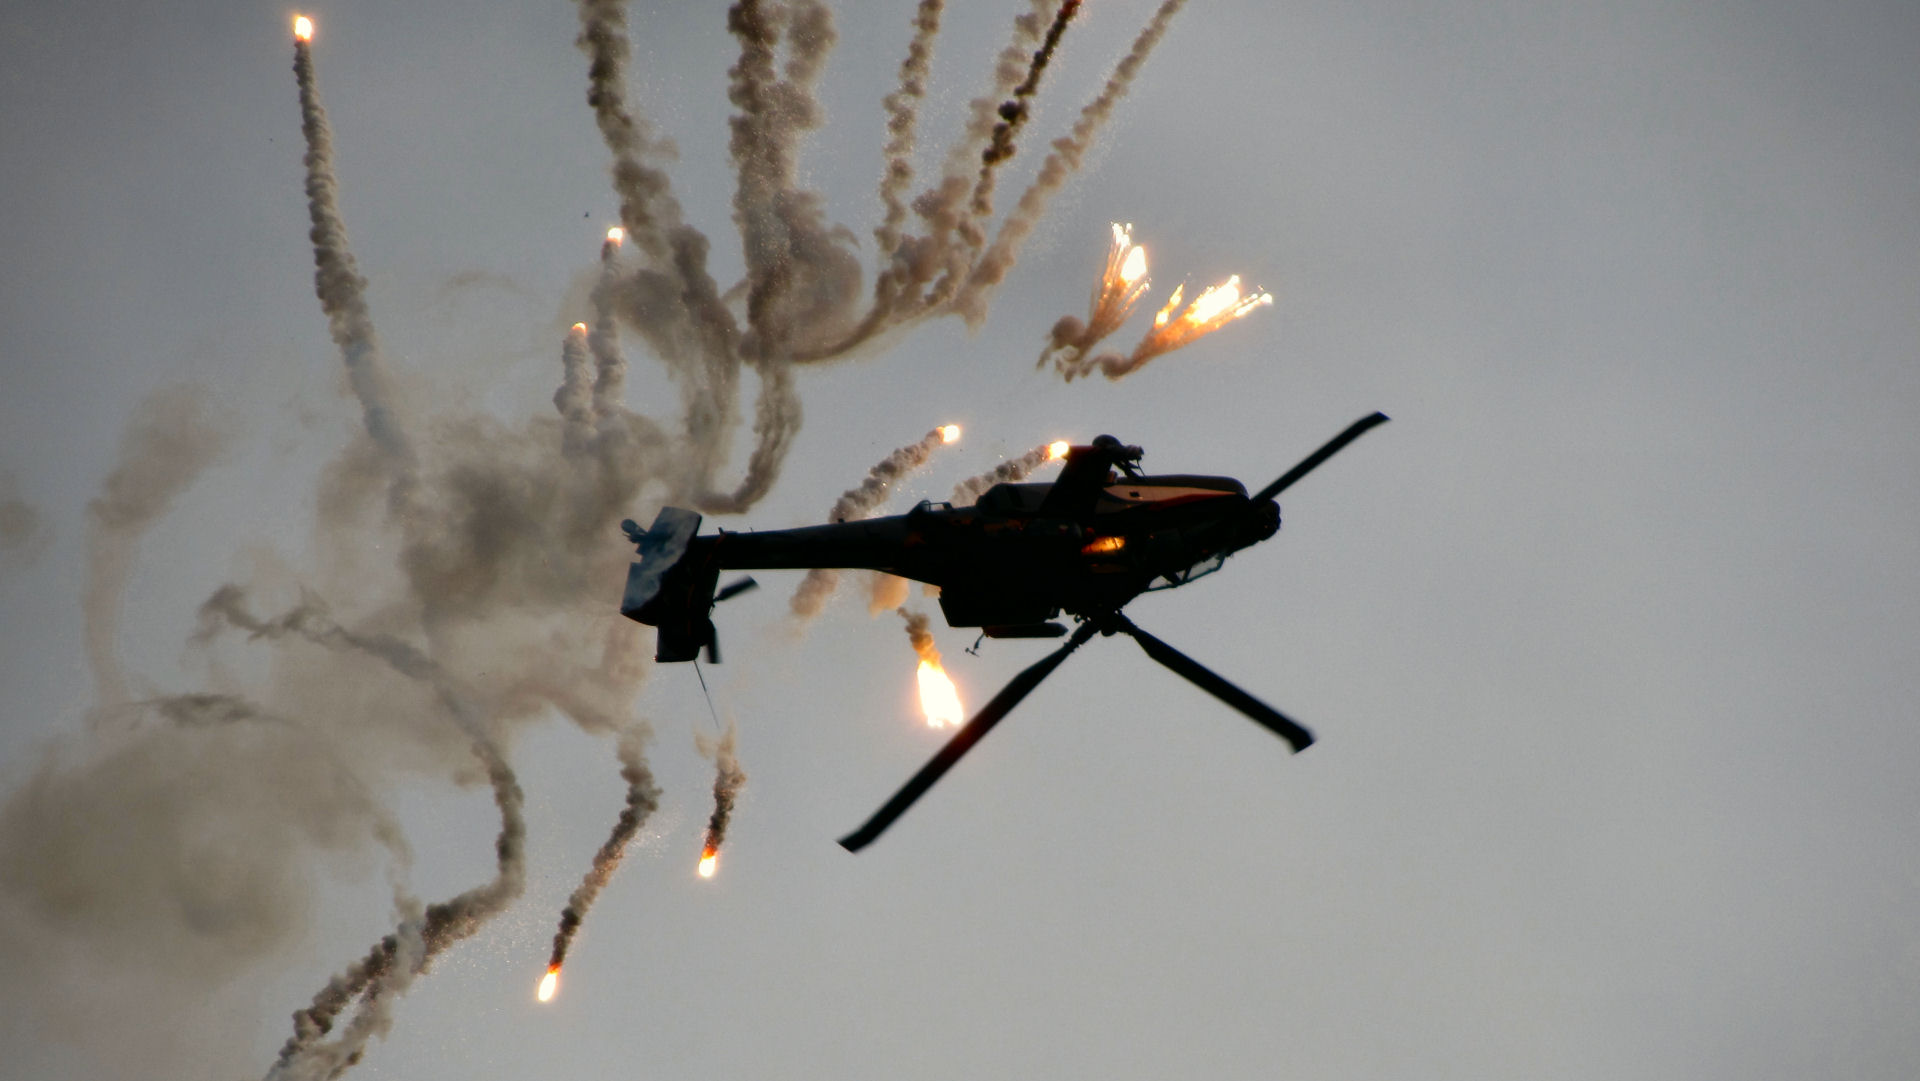 Dutch Apache helicopter releasing flares, taken by Iffick.